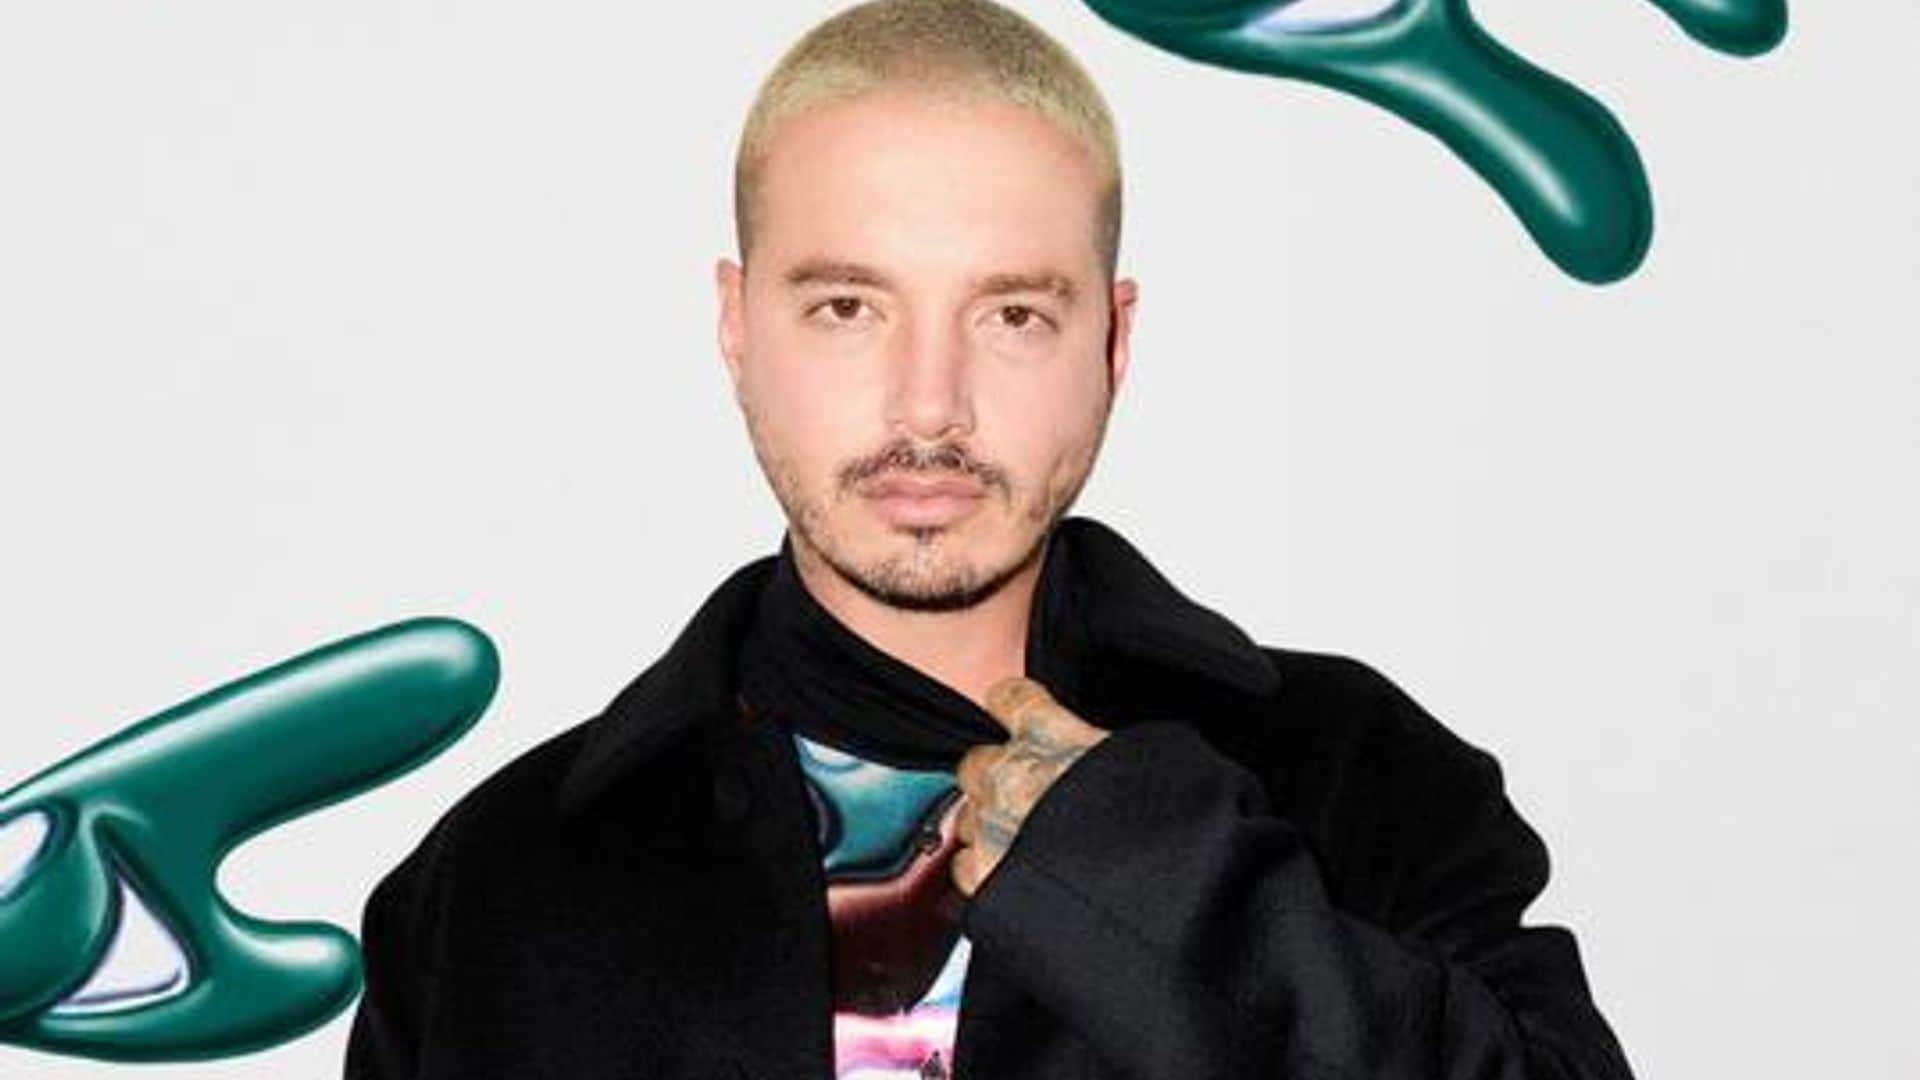 J Balvin opens up about battling COVID-19: ‘I’m scared’